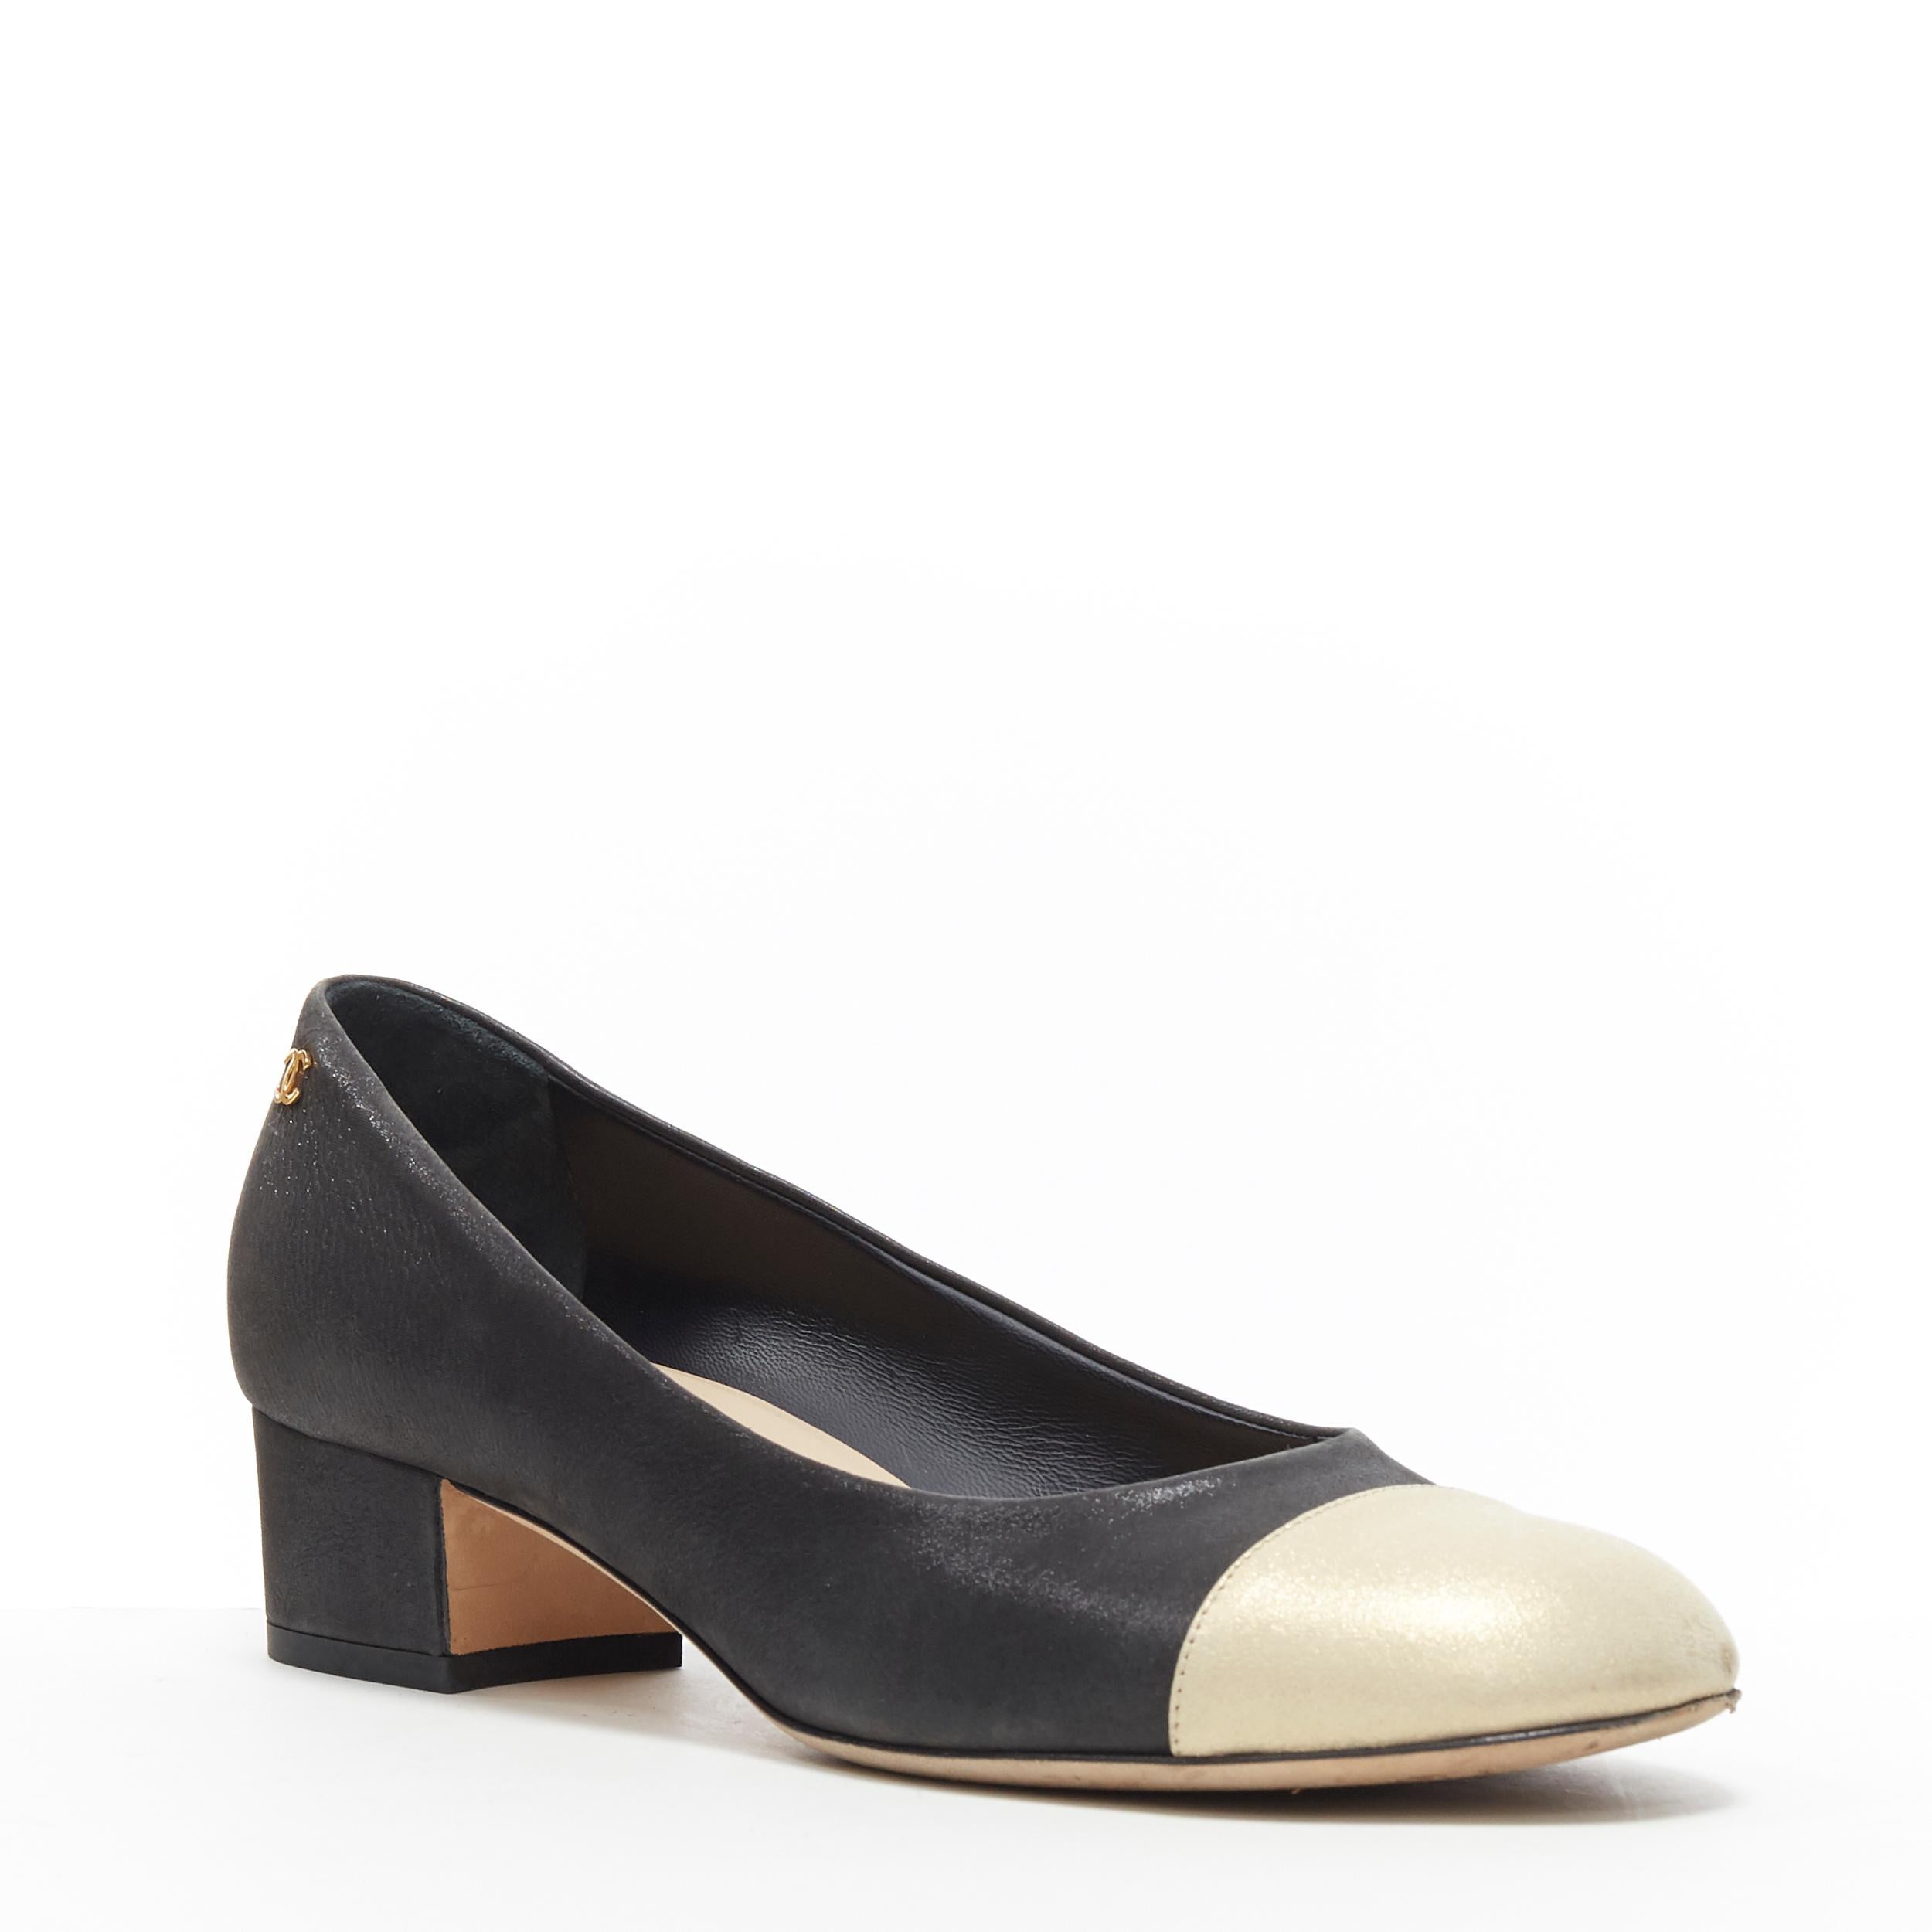 CHANEL 15C black gold toe cap round toe block heel CC mid heel pump EU38.5
Brand: Chanel
Designer: Karl Lagerfeld
Model Name / Style: Pump
Material: Fabric
Color: Black
Pattern: Solid
Closure: Slip on
Extra Detail: Mid (2-2.9 in) heel height. Round